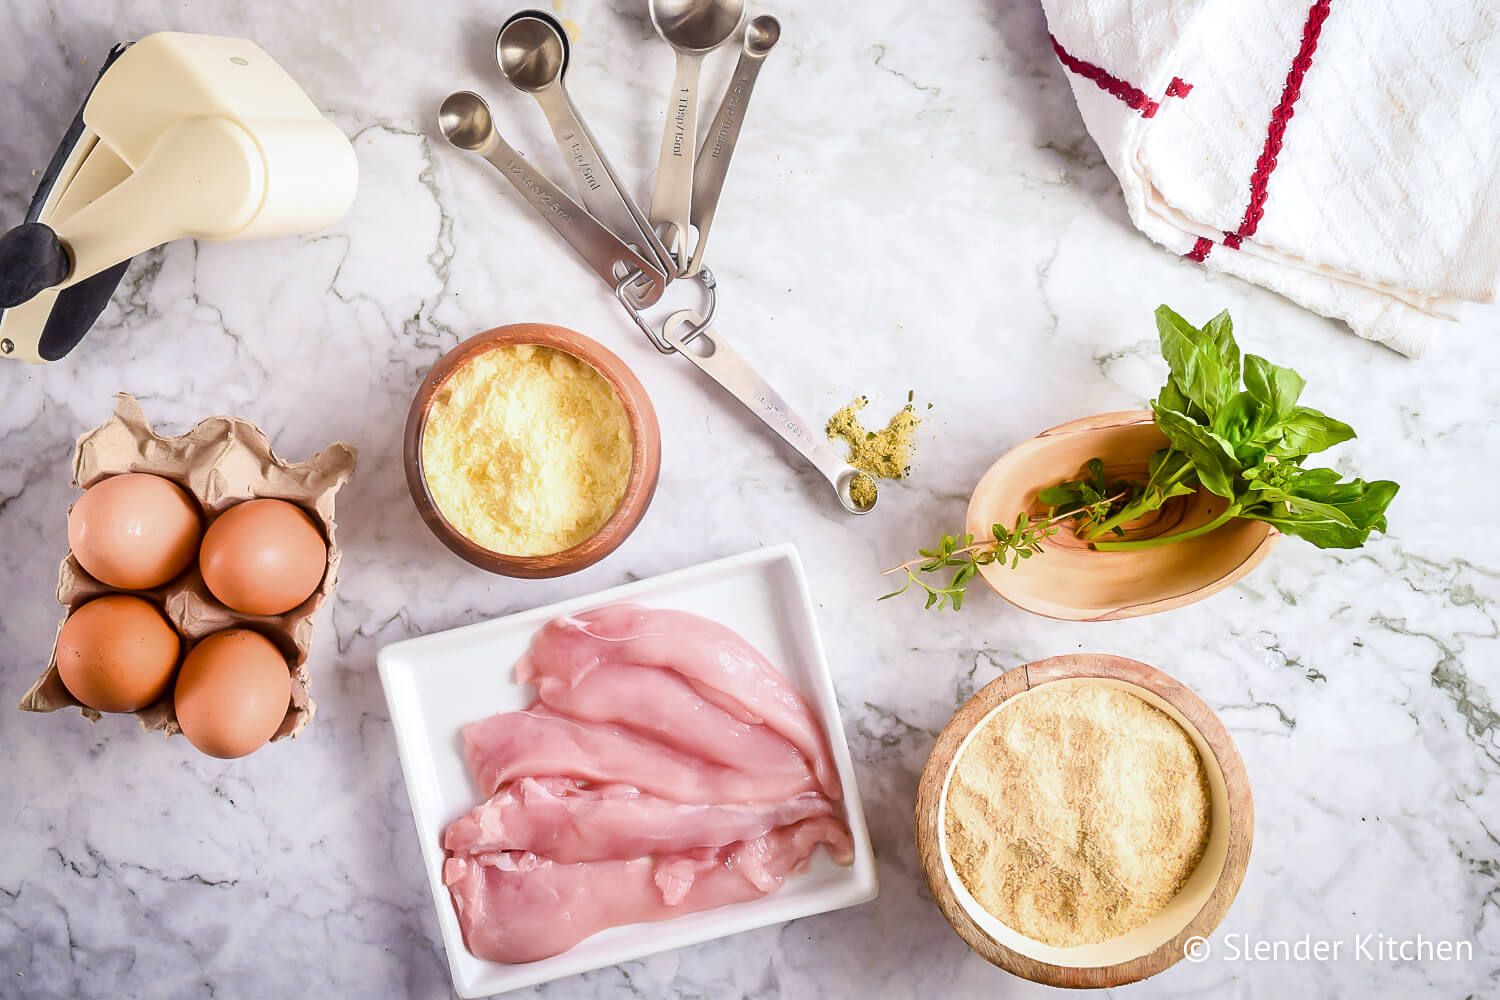 Ingredients to make Parmesan Crusted Chicken including cheese, egg whites, chicken breast, basil, and oregano.